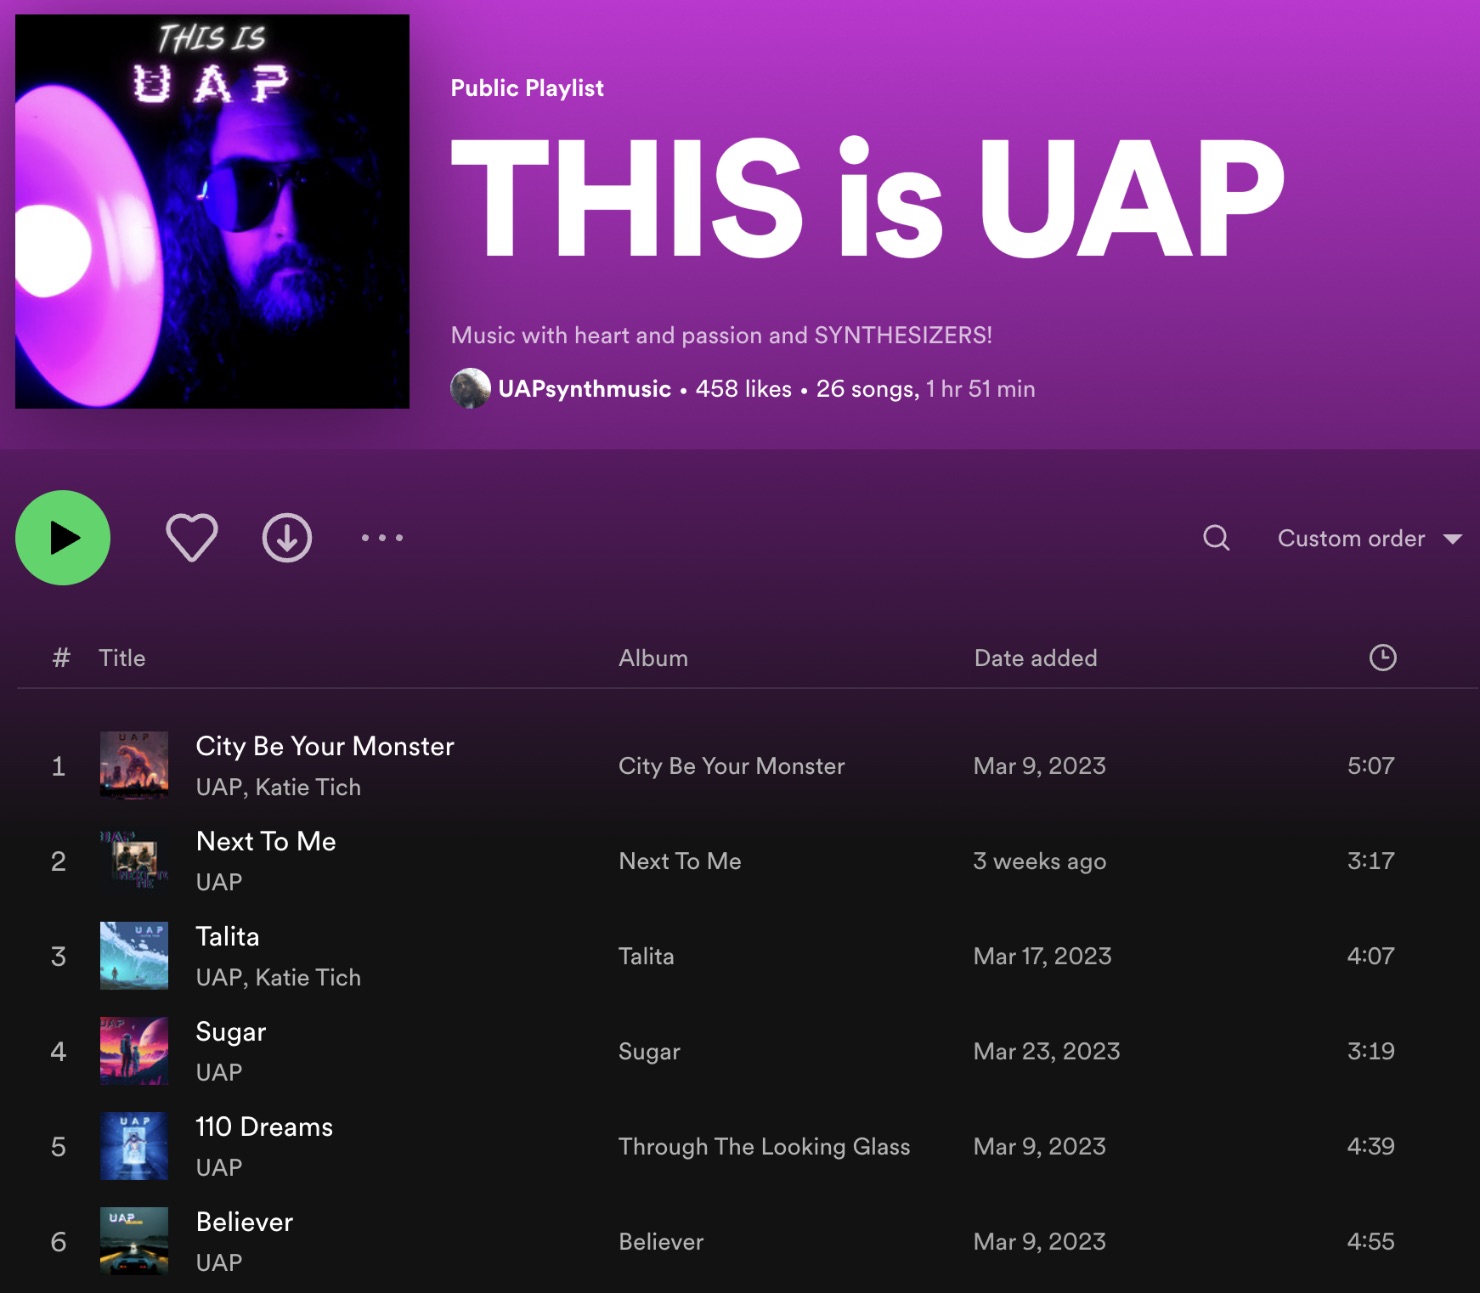 This is UAP playlist